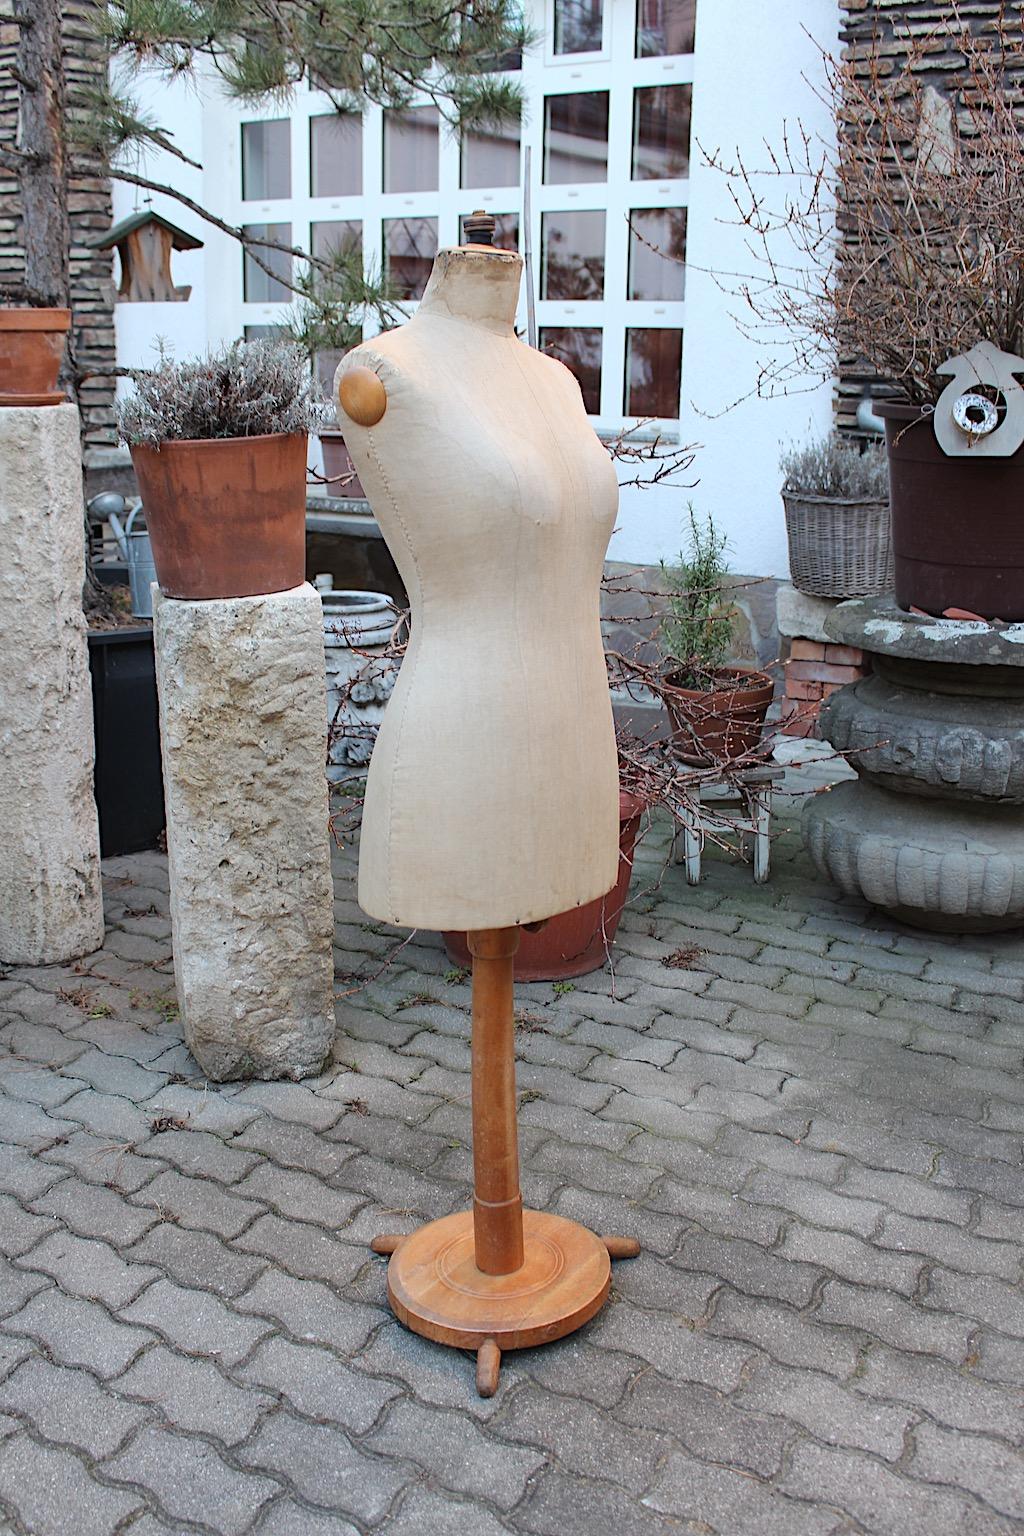 Antique historicsm vintage mannequin tailor´s dummy from beech and linen manufactured circa 1890 Austria.
The vintage mannequin shows a circular base with three feet from beech in light brown.
The body is easy to adjustable from 145 cm to 165 cm